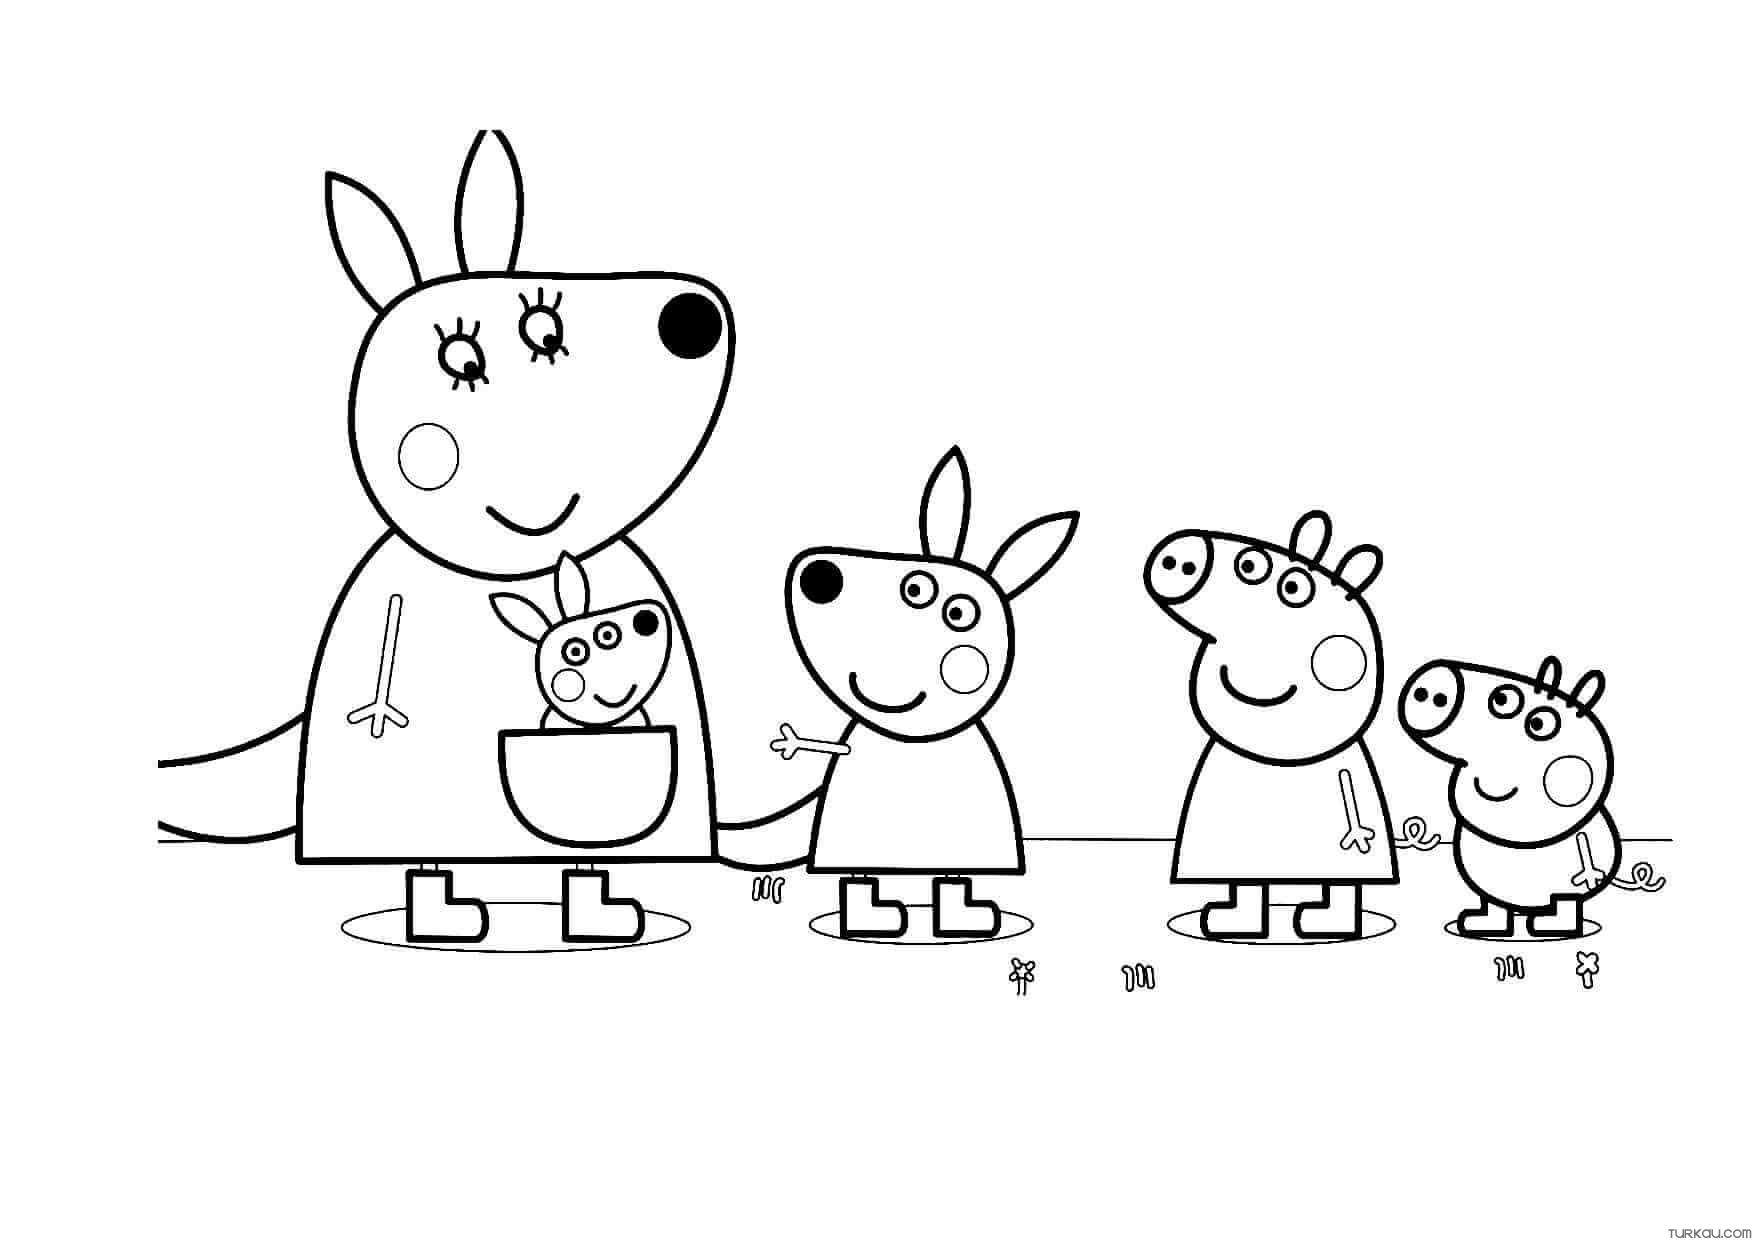 Peppa Pig Family Coloring Page » Turkau